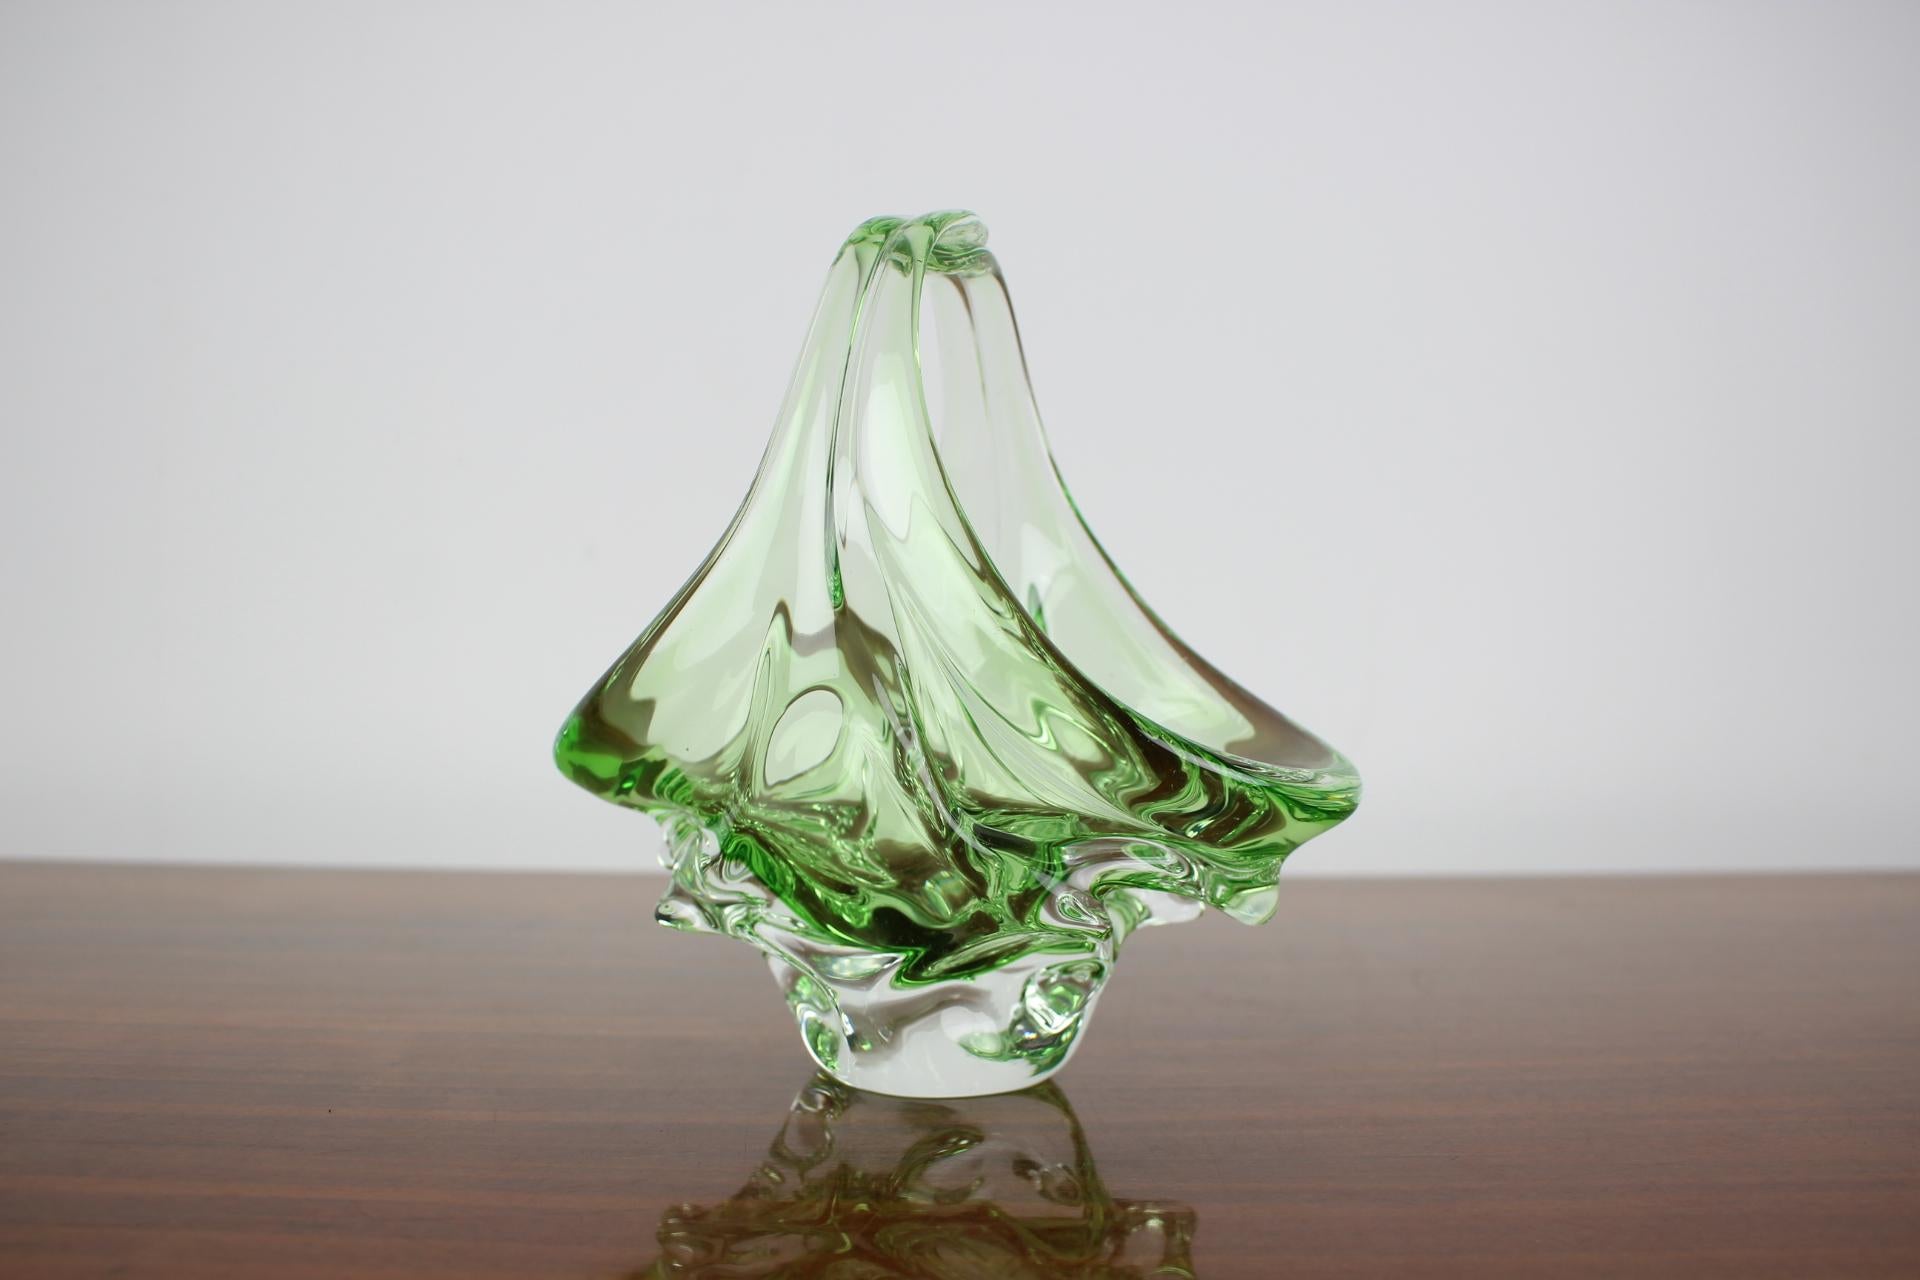 - Made in Czechoslovakia
- Made of glass
- Re-polished
- Good, original condition.